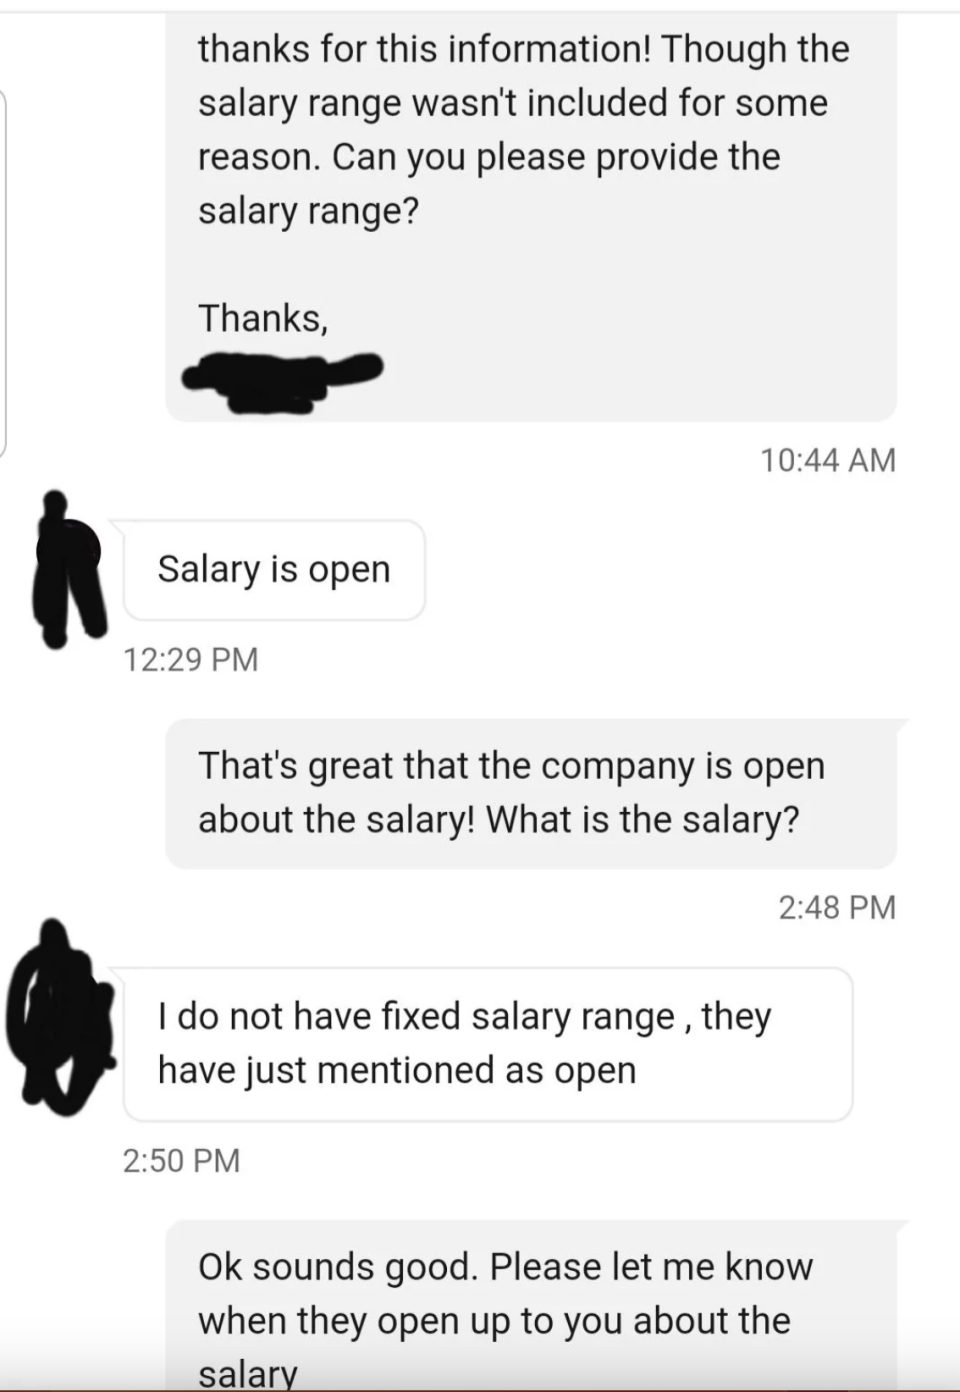 "I do not have fixed salary range, they have just mentioned as open"